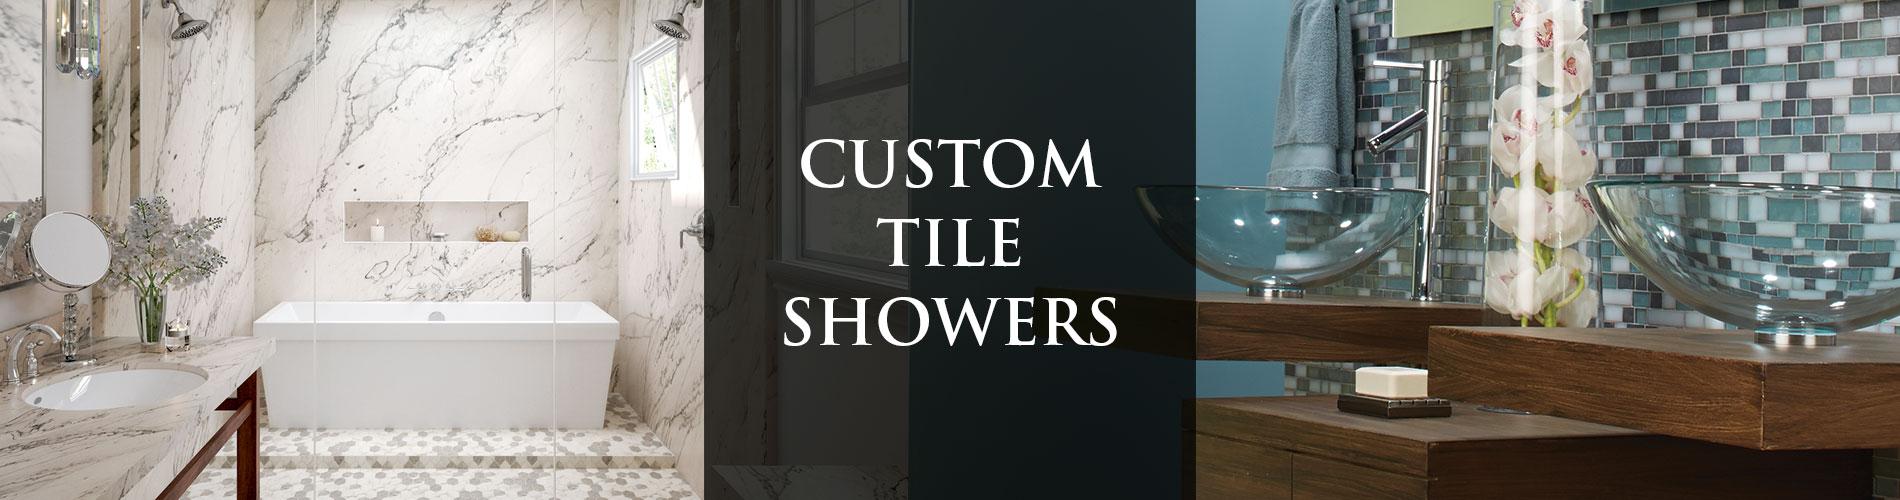 Stop by today to get started on your next custom tile shower project!